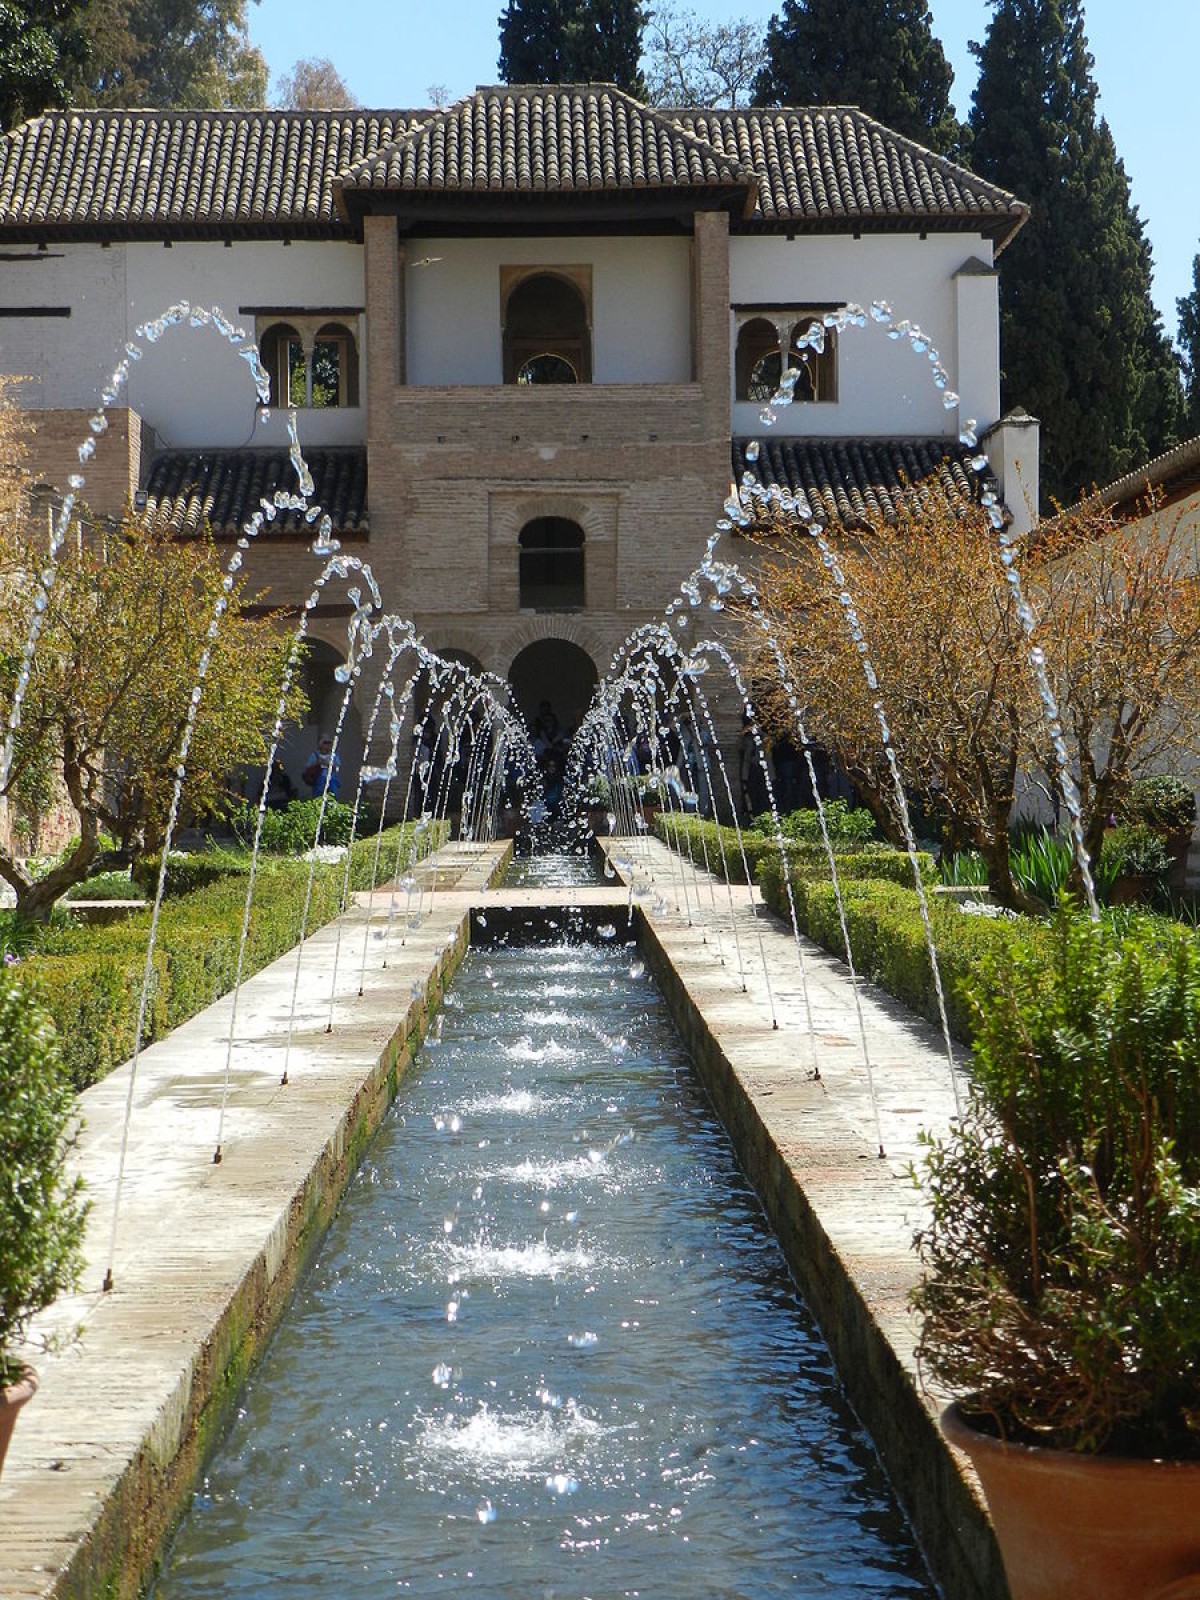 The Generalife gardens of Alhambra in Spain (creative commons)